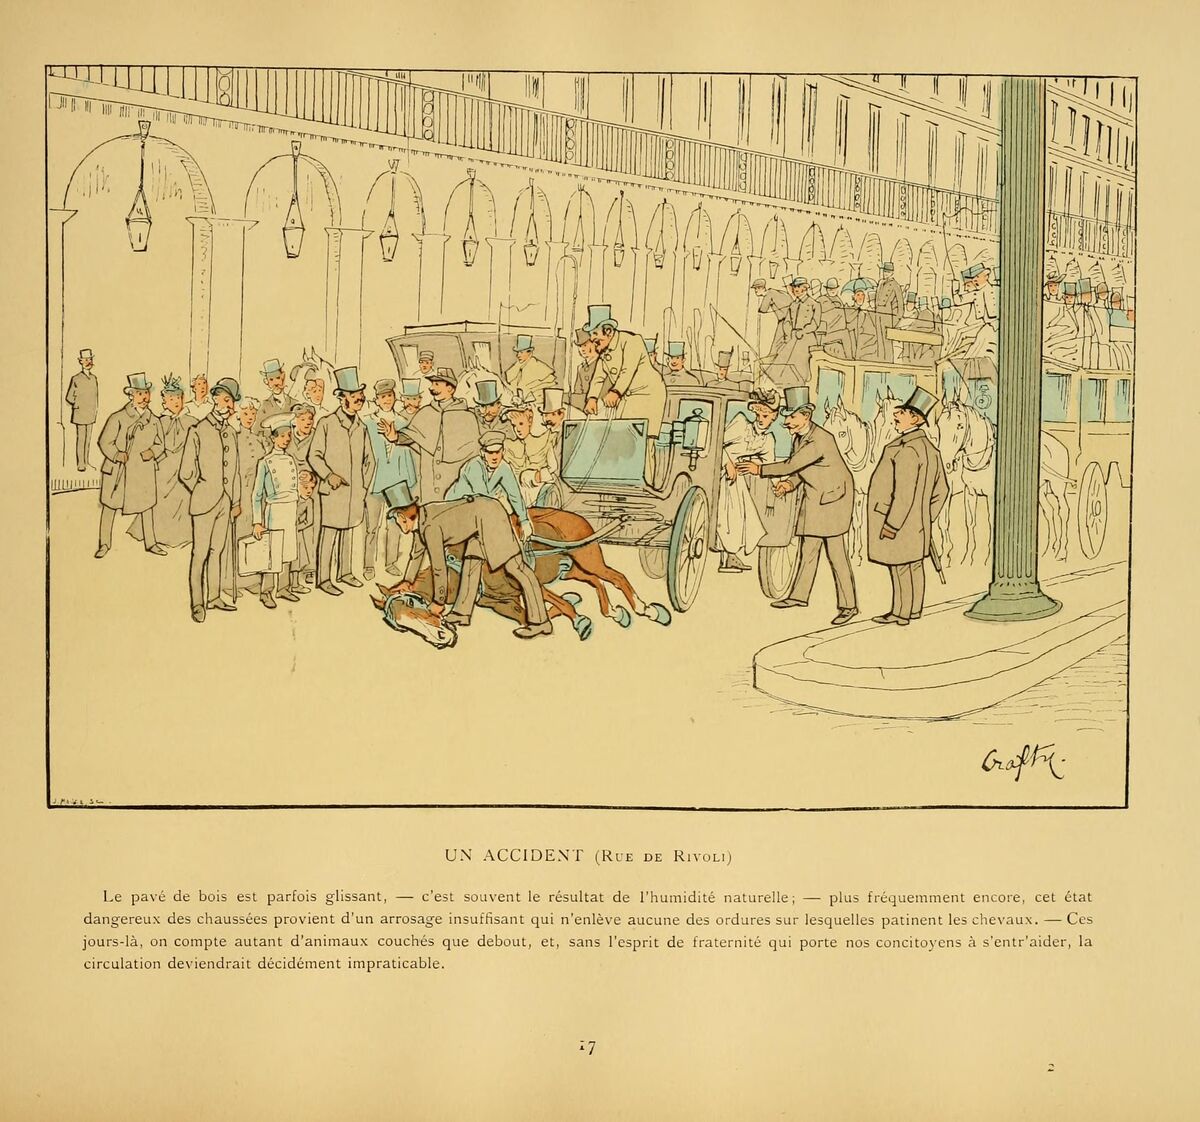 GFD 2/207: An accident in the Rue Rivoli (illustration by Crafty, c. 1894)